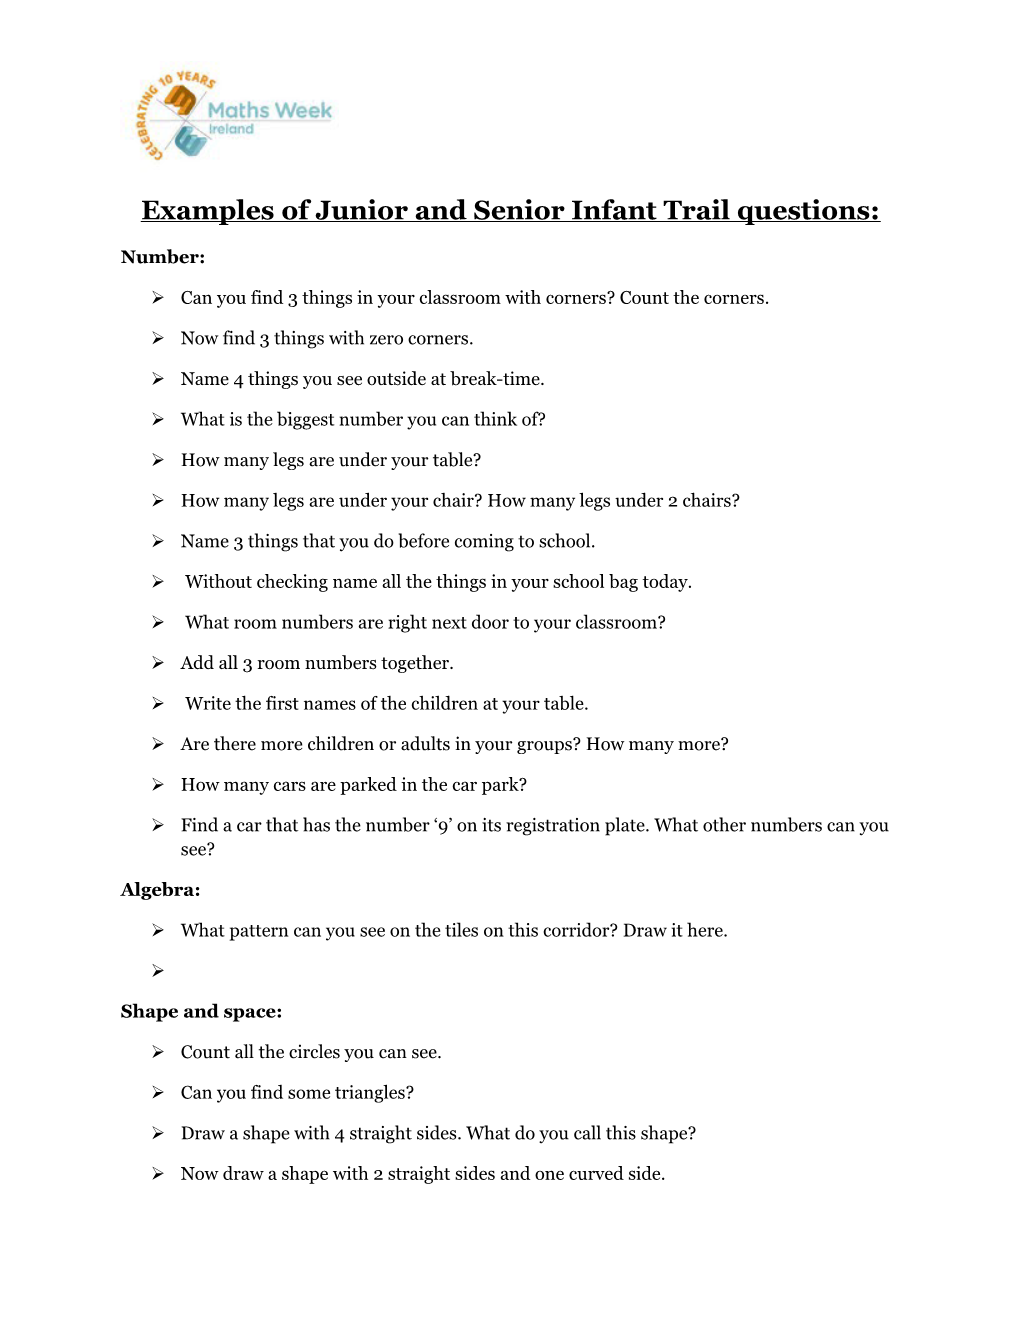 Examples of Junior and Senior Infant Trail Questions